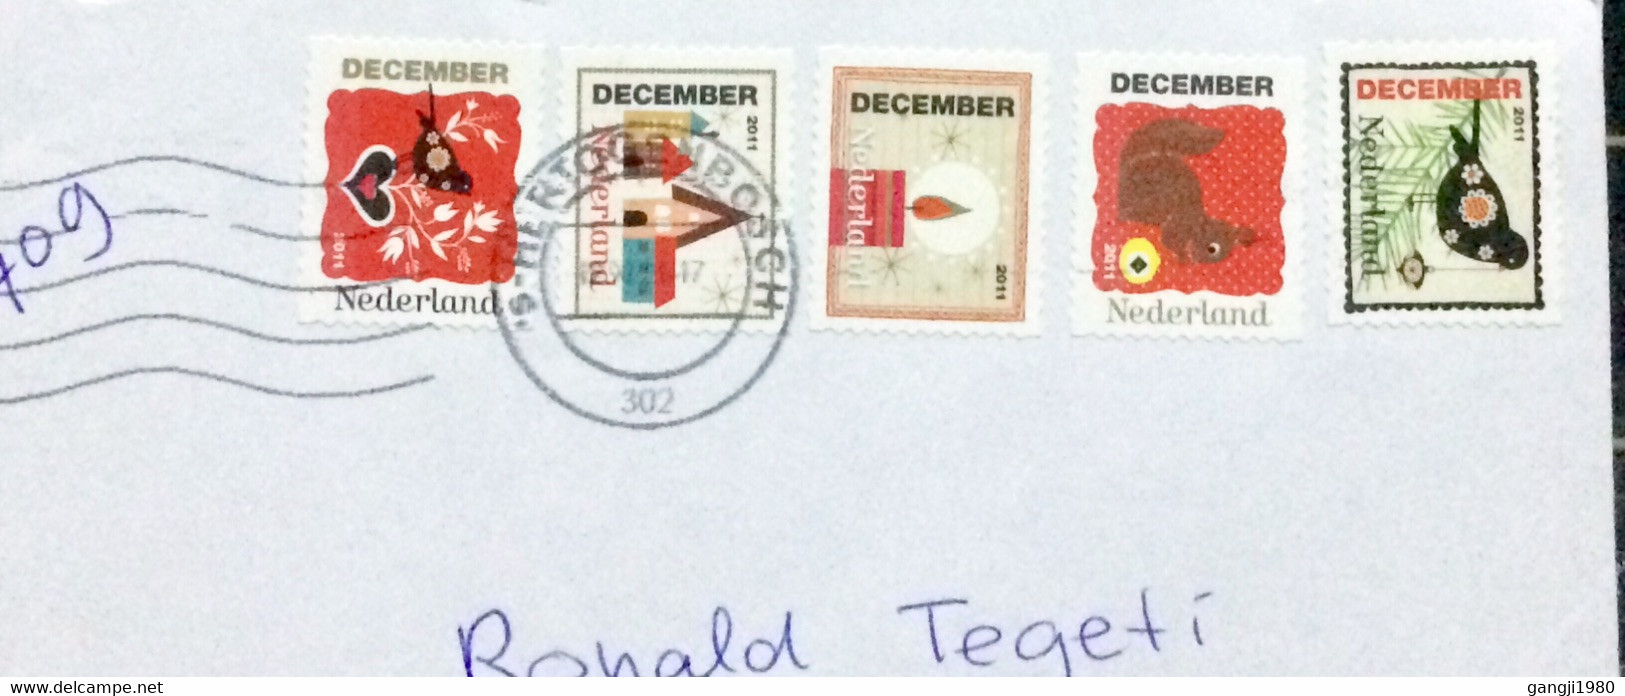 NEDERLAND 2011, COVER USED TO USA, DECEMBER 2011  DIFF  5 STAMP, BIRD, SQUIRREL, HOME, ROTTENBOSCH CITY CANCEL. - Covers & Documents